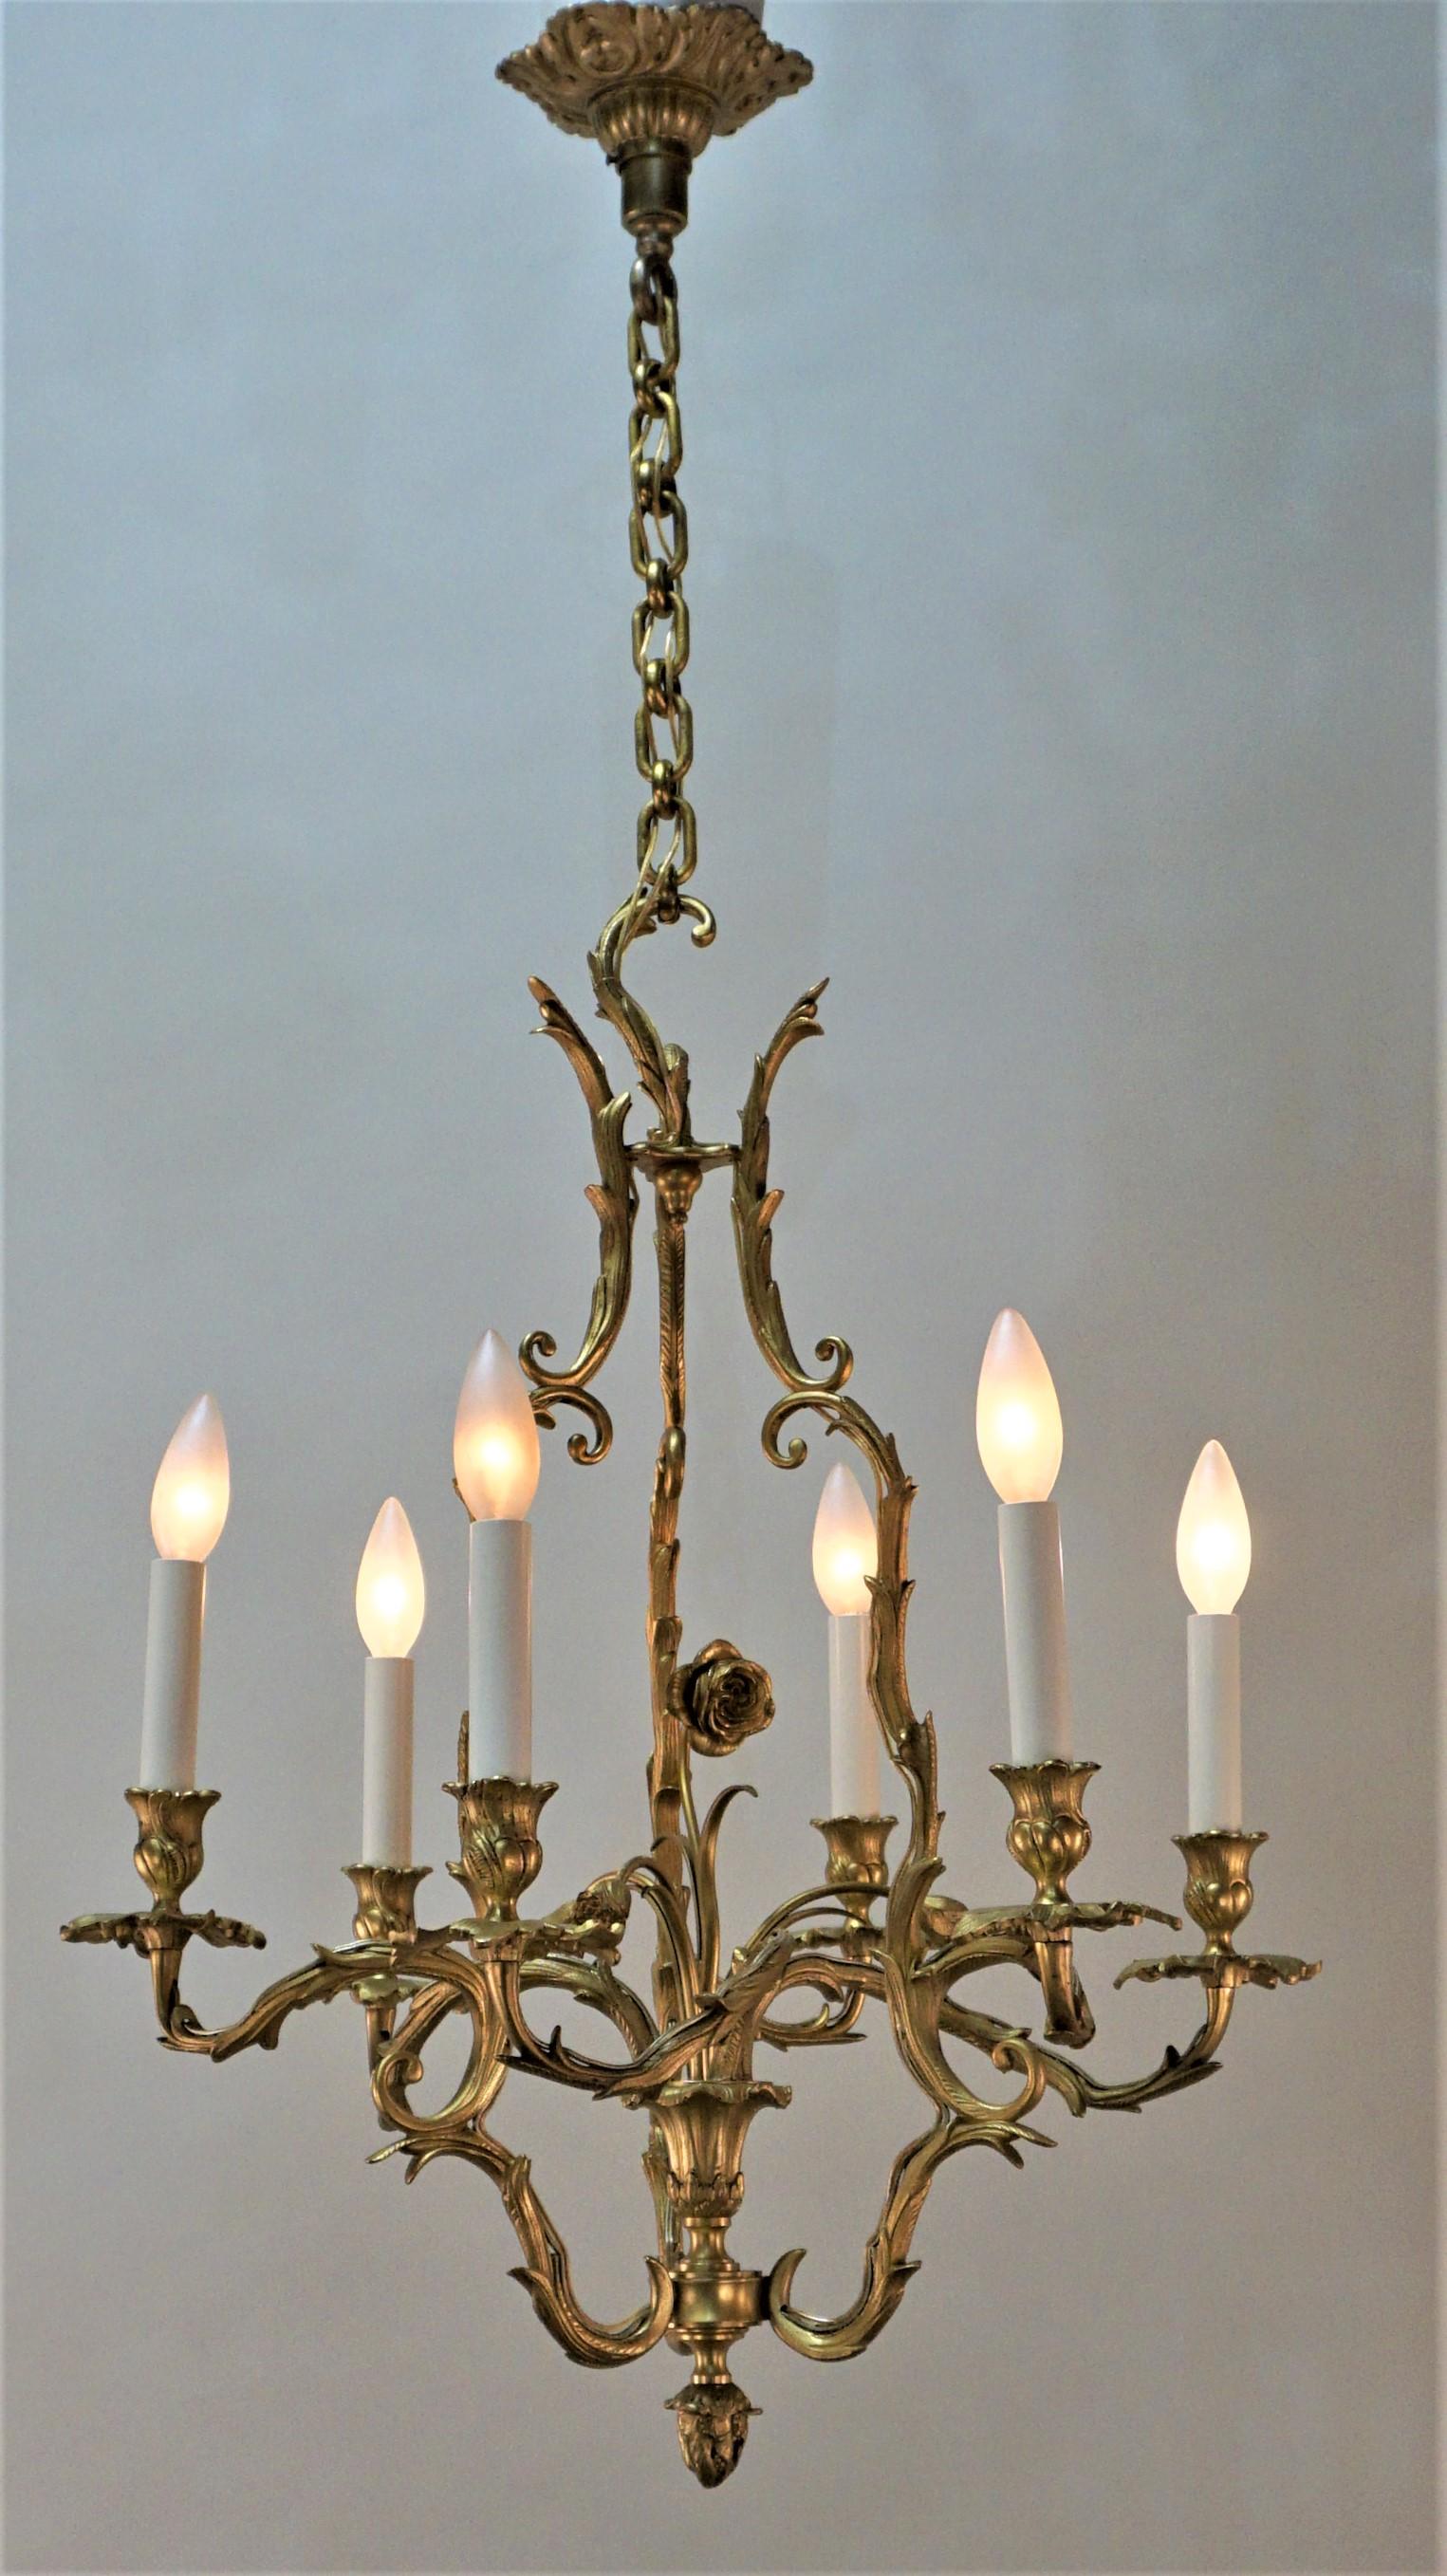 Elegant six-arm French doré bronze Art Nouveau chandelier
60 watts max each light.
Measures: Height fully installed 34